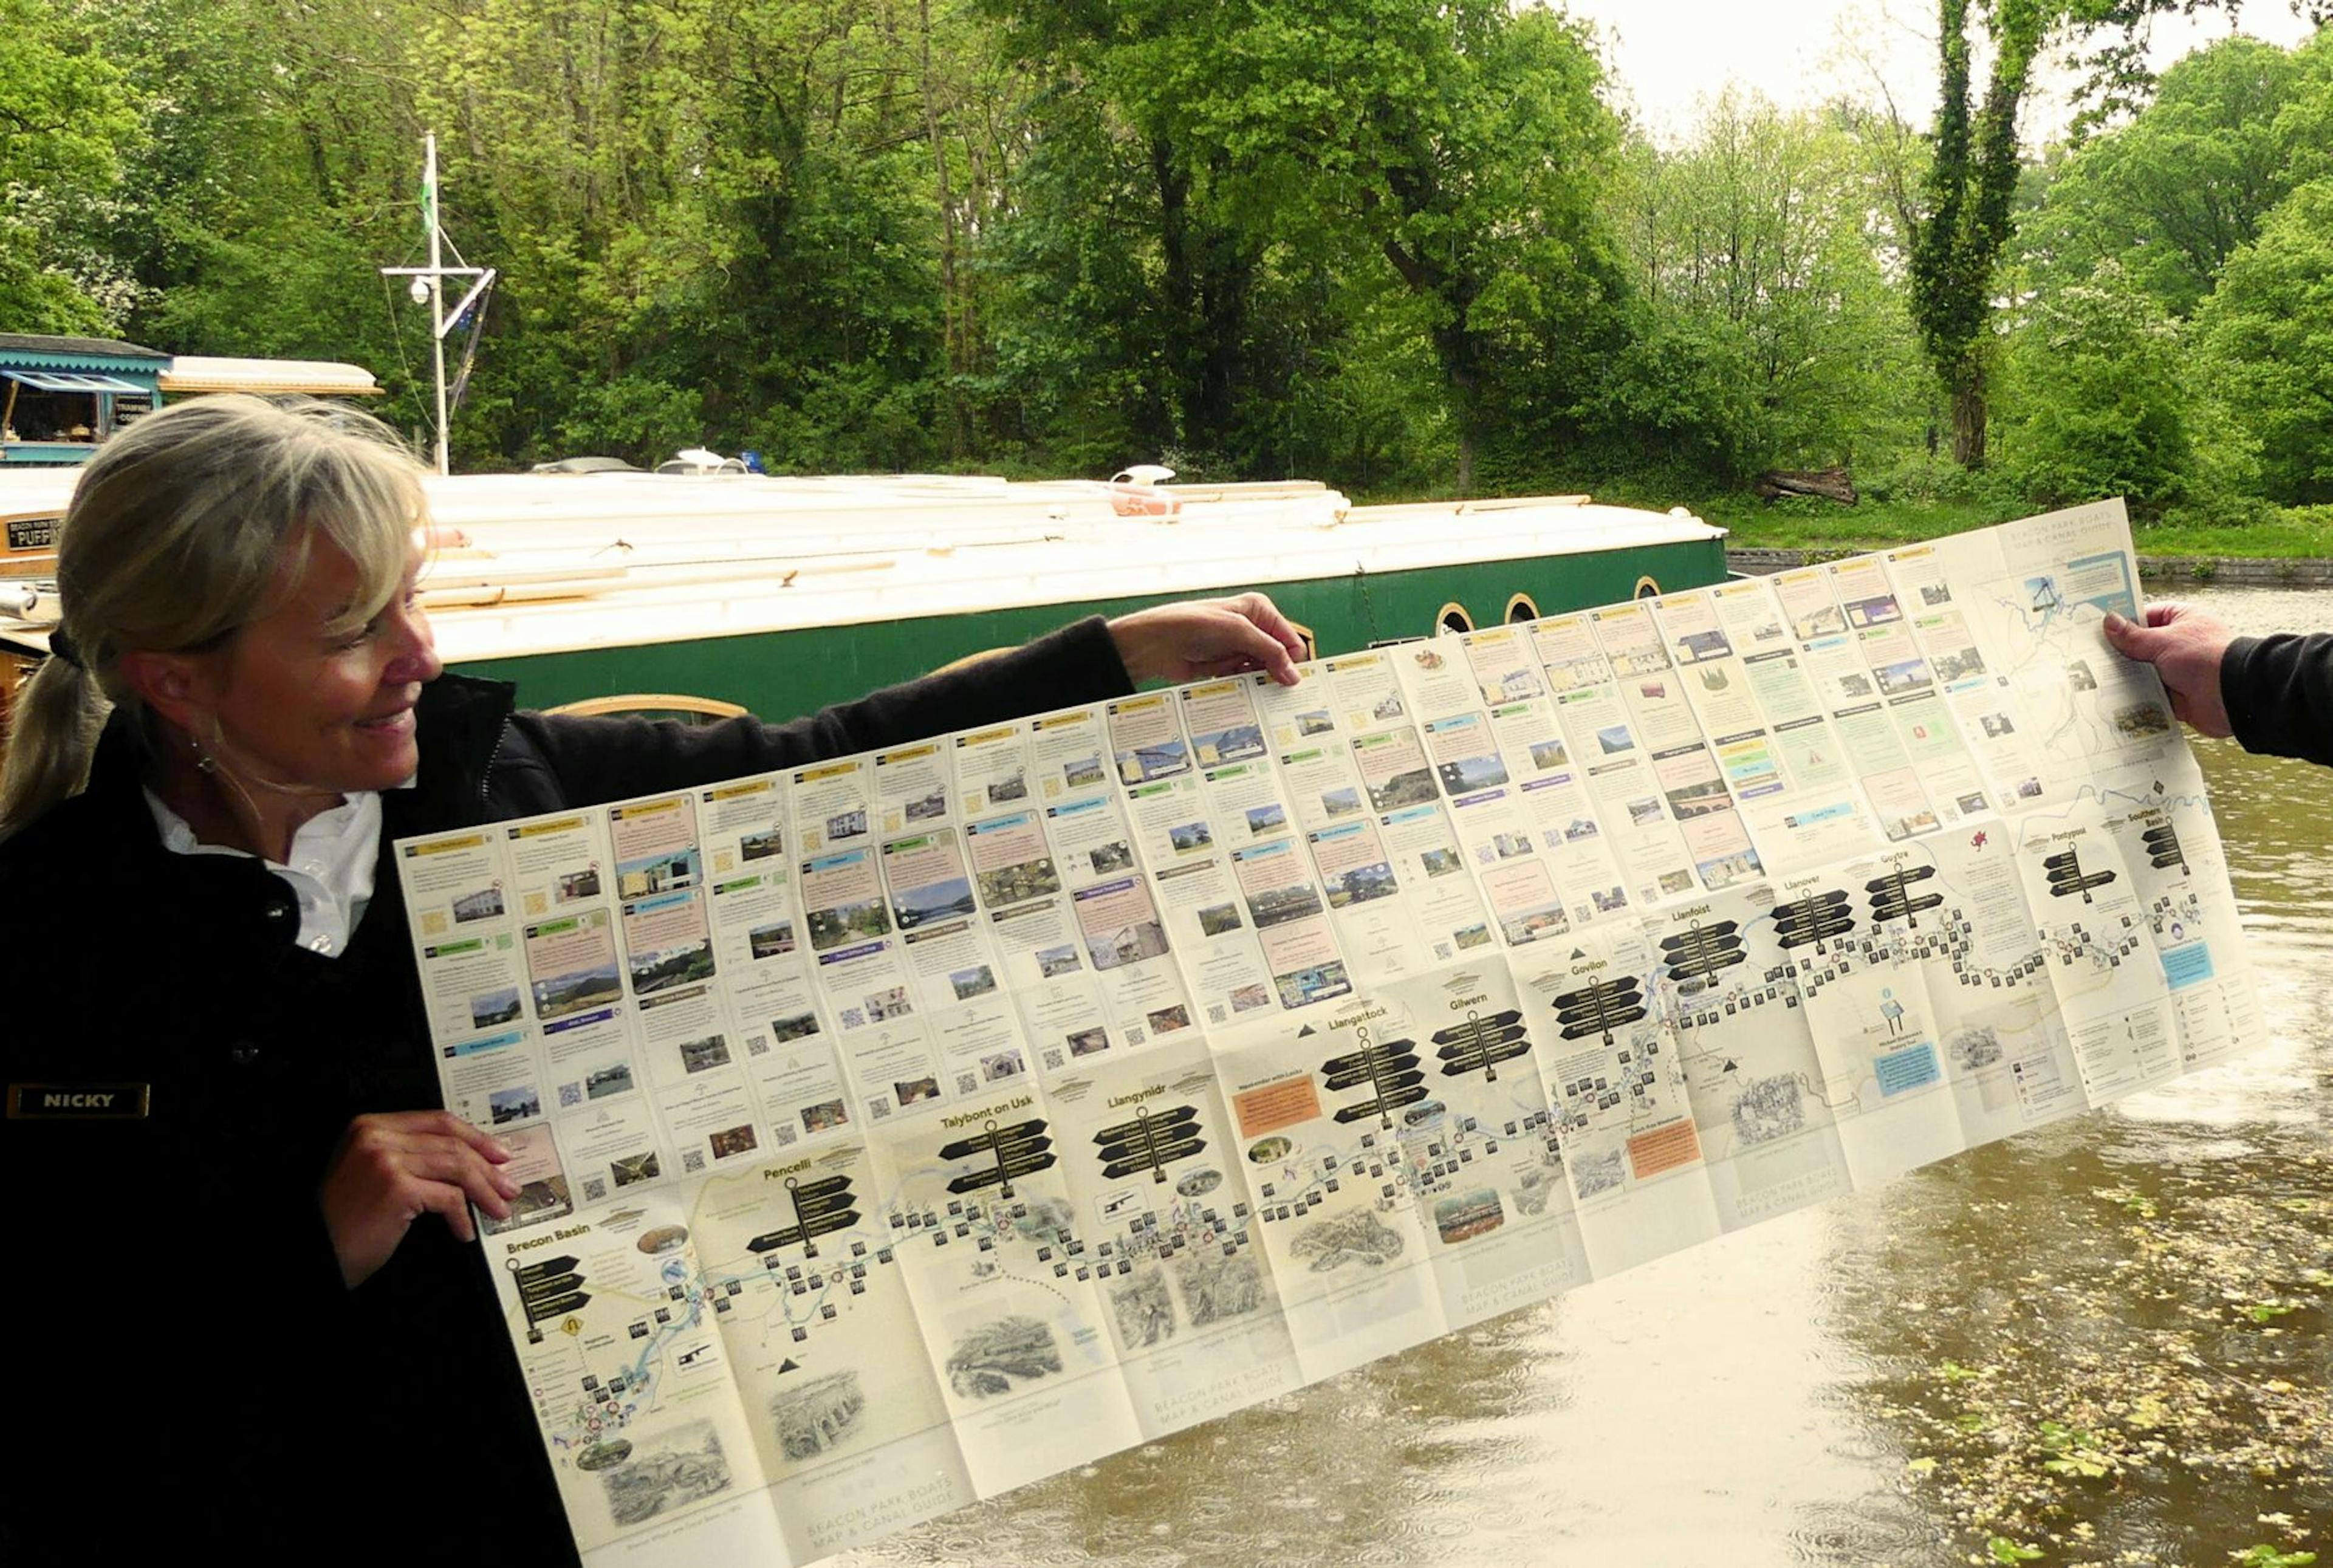 Our new Monmouthshire and Brecon Canal map, activity planner and exploration guide